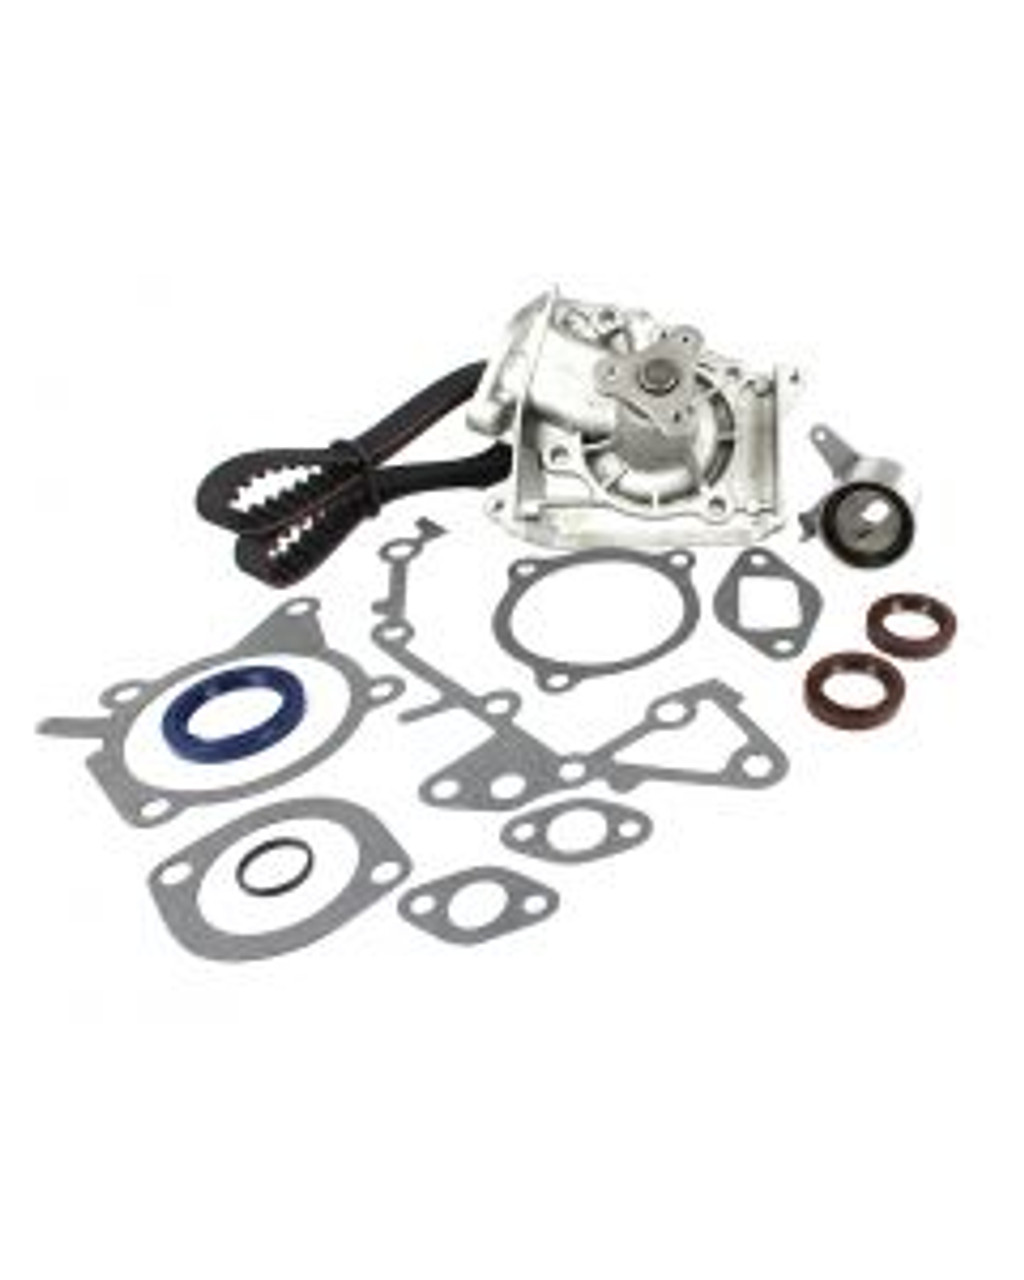 Timing Belt Kit with Water Pump 1.8L 1994 Mazda Protege - TBK451WP.20